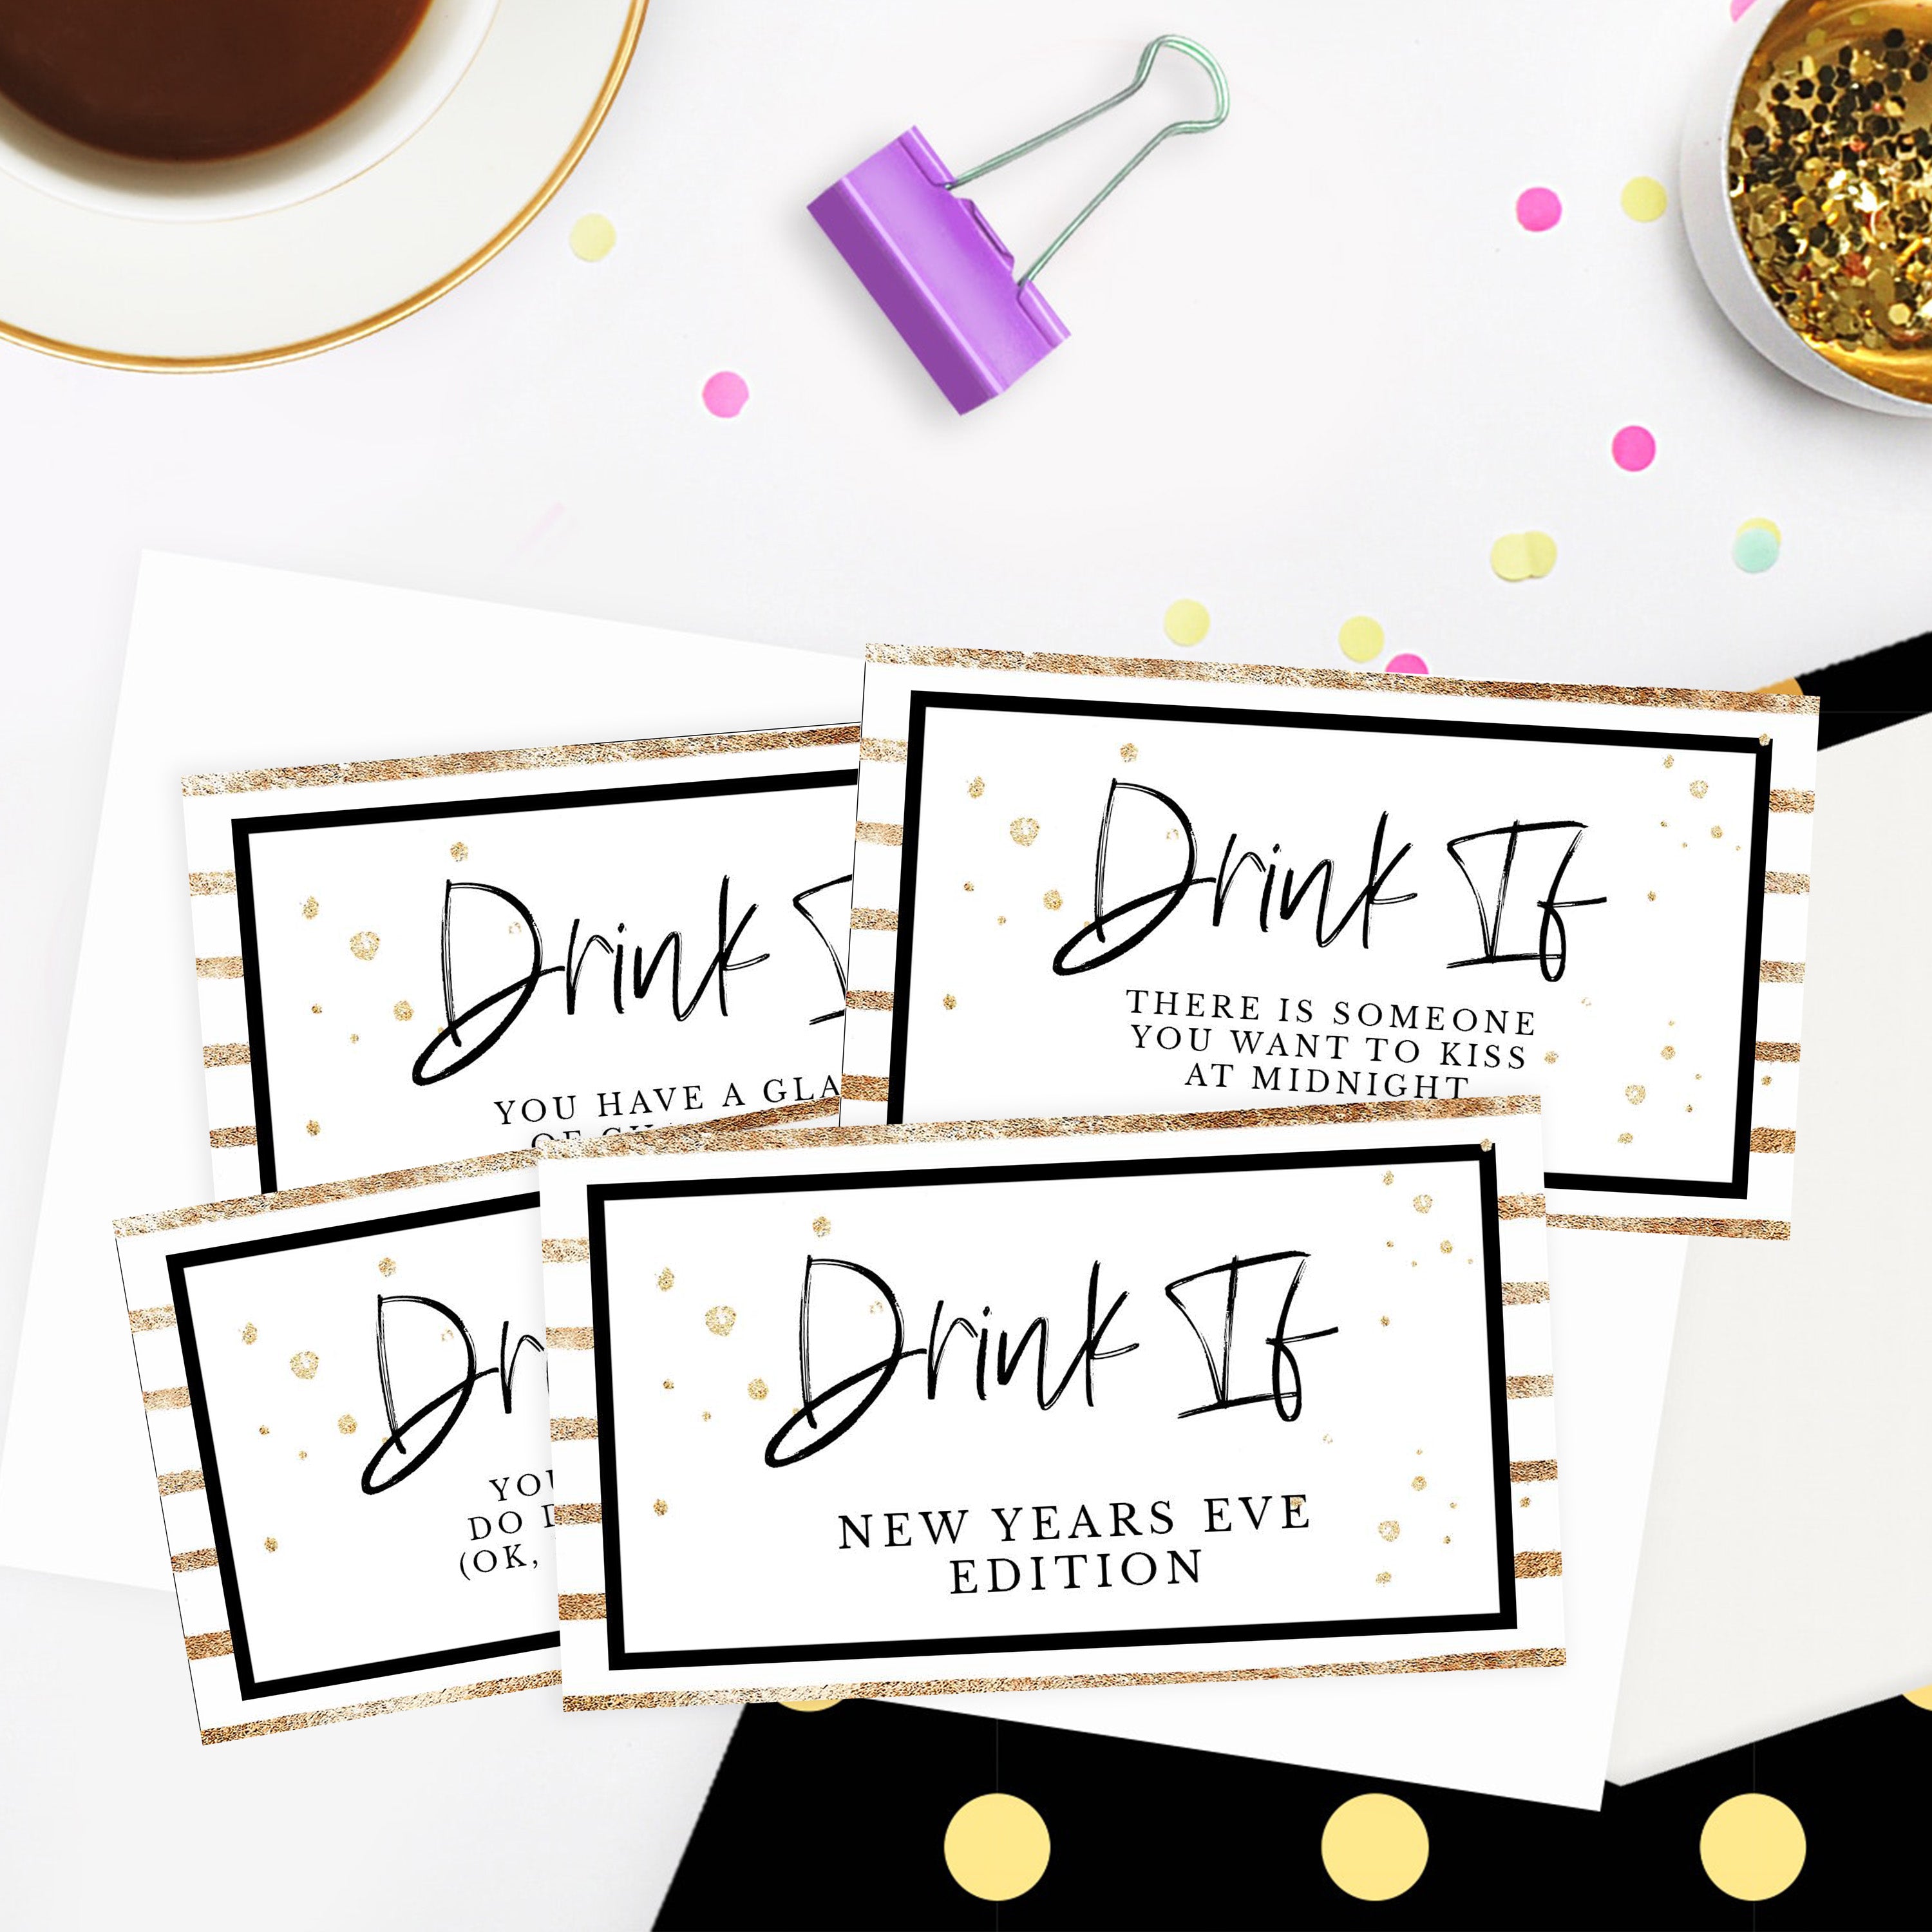 DIY Drinking Game  Drinking games for parties, Drinking games, Drunk games